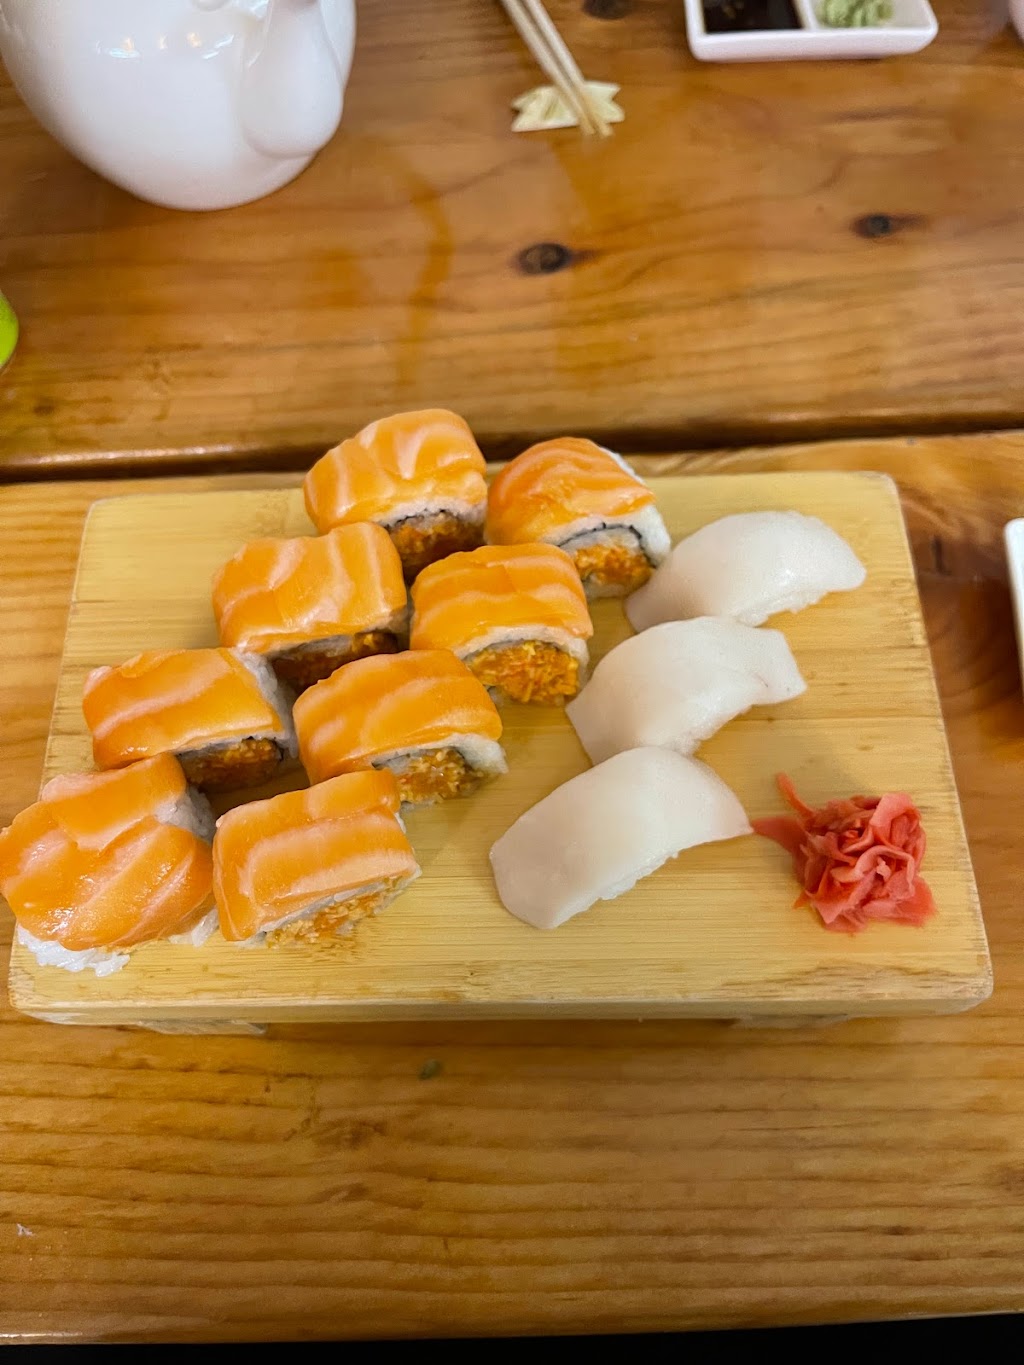 Sushi Red LLC | 450 East St, Plainville, CT 06062 | Phone: (860) 410-1829